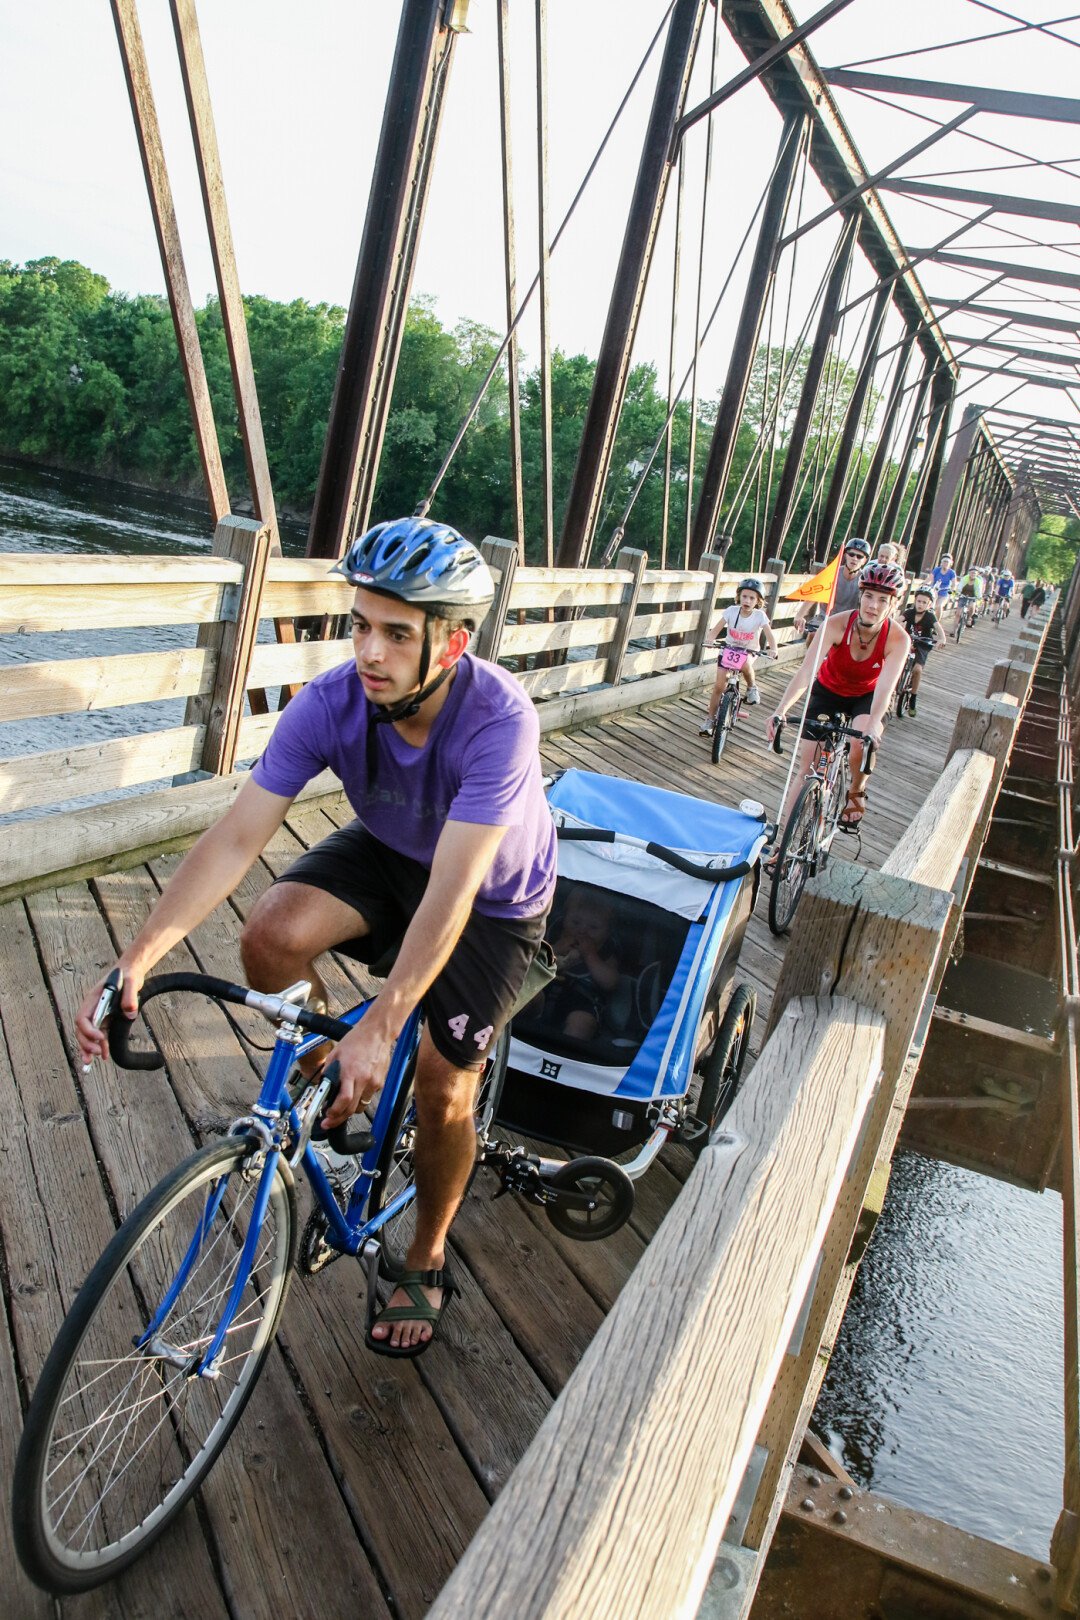 A WHEELIE GOOD TIME. Part of Bike Week 2017, “Bikes, Bridges, & Brews” brought together bike lovers June 10 for a ride over some of Eau Claire’s most beautiful bridges with stops at local breweries.